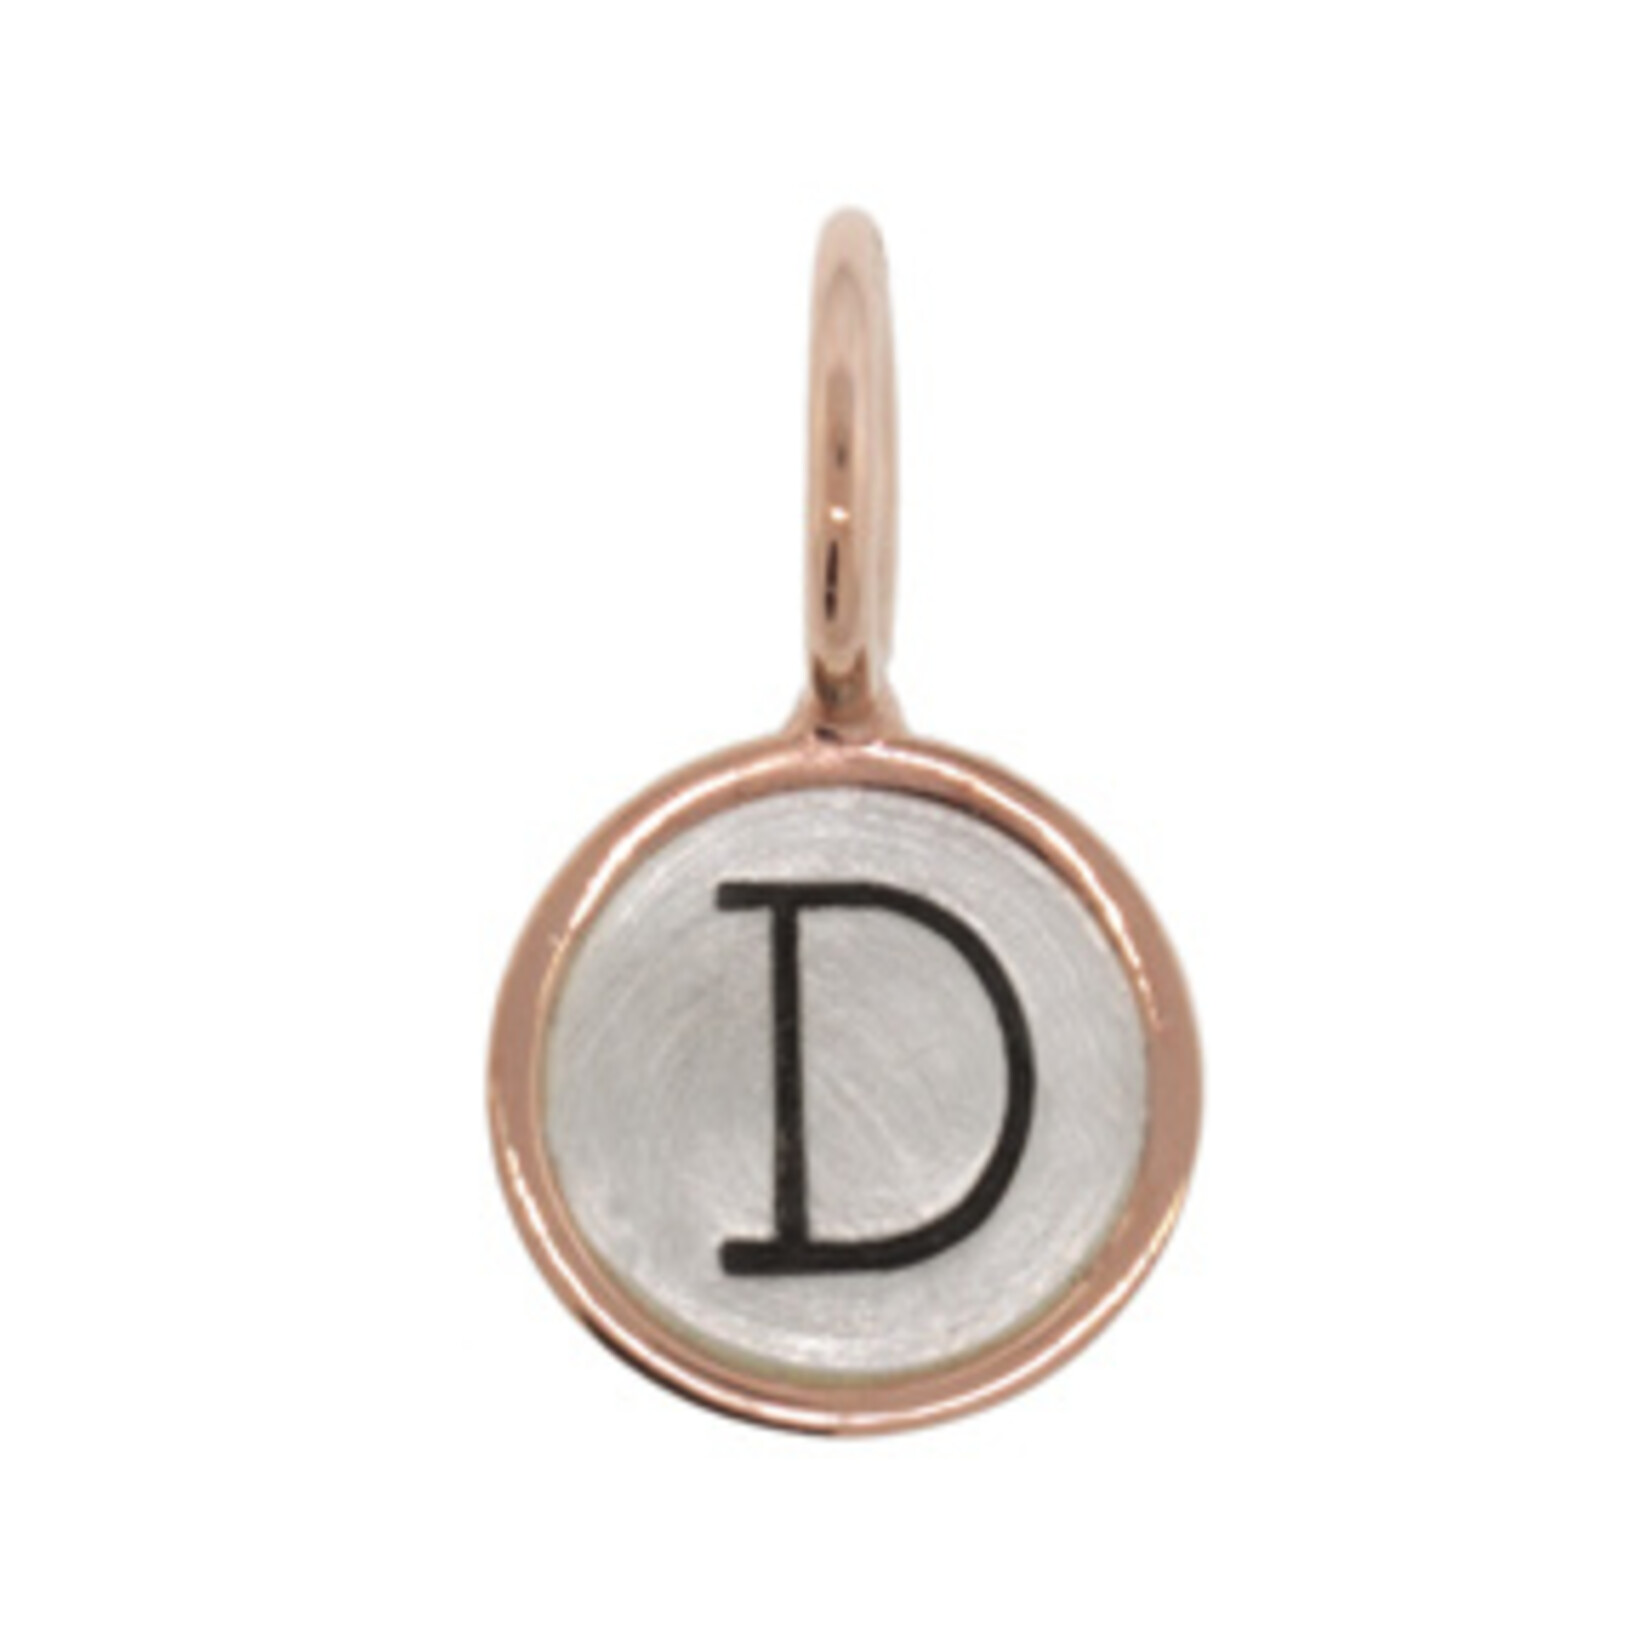 Heather Moore "D" Stamped on Sterling Silver Round Charm (Size 1) with 14k Rose Gold Frame